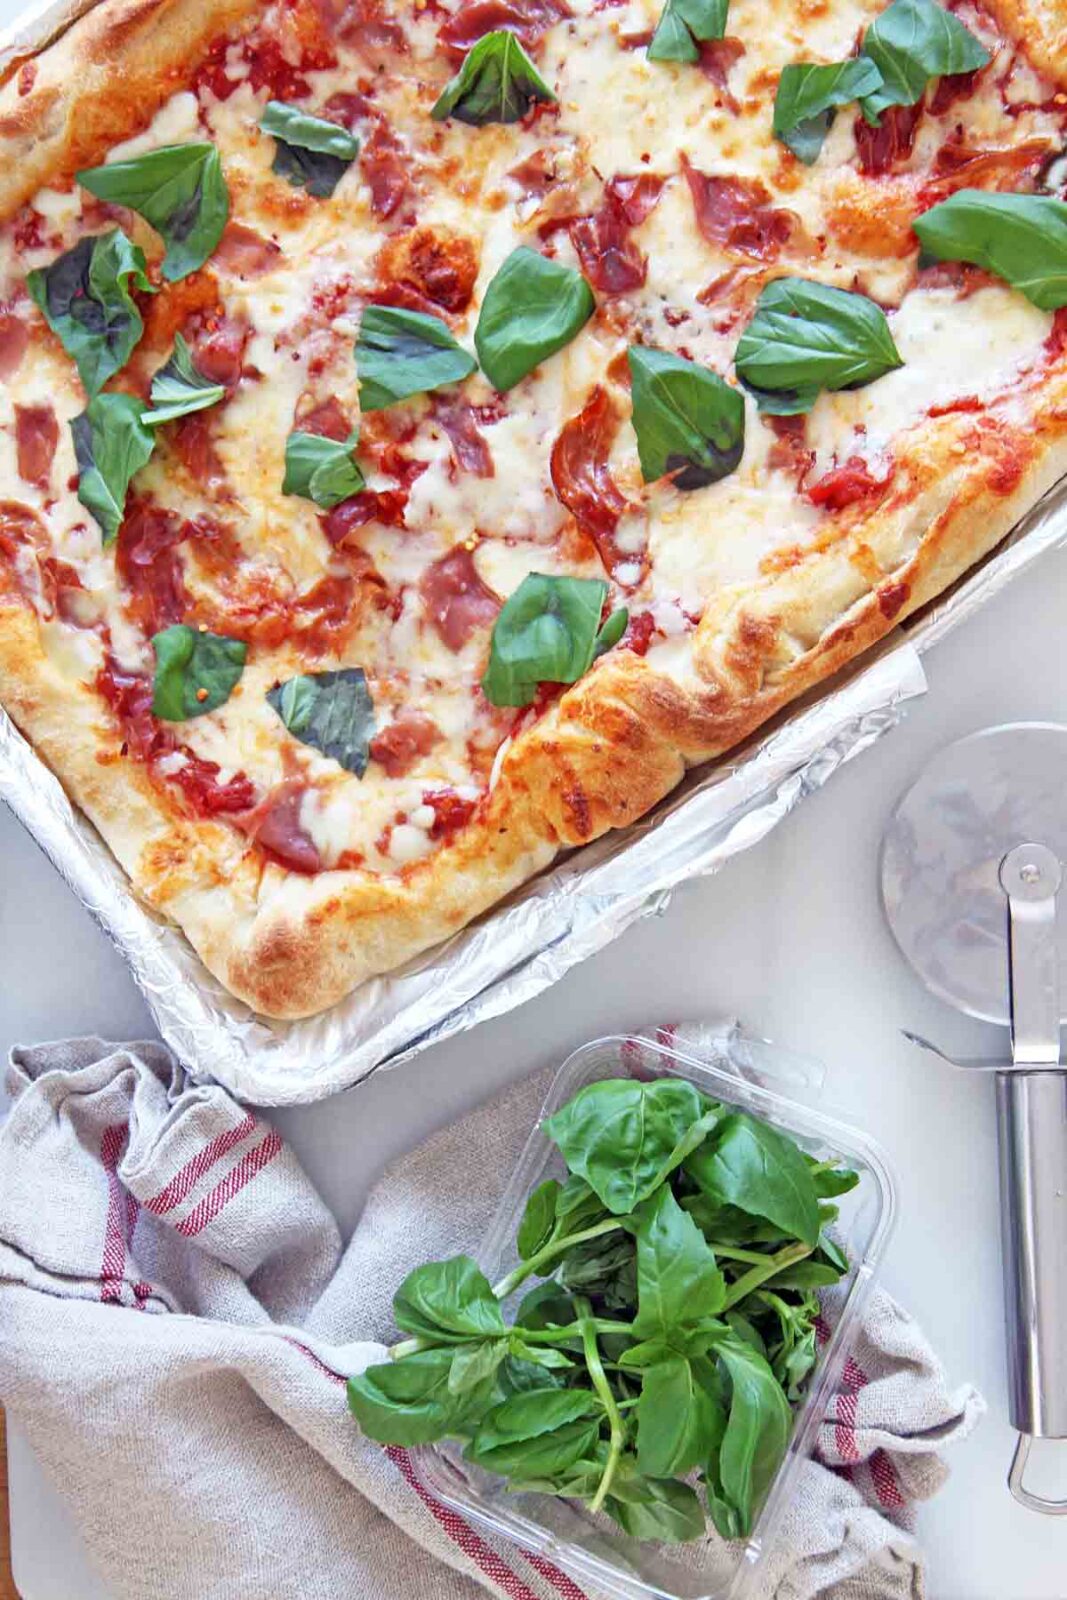 Sheet Pan Stuffed Crust Pizza (cheesy happy dinner smiles) Recipe. Grab a slice of #NYCpizza at home. This is easy quick weeknight recipe that your family will smile for. Happy #Pizza cooking! www.ChopHappy.com